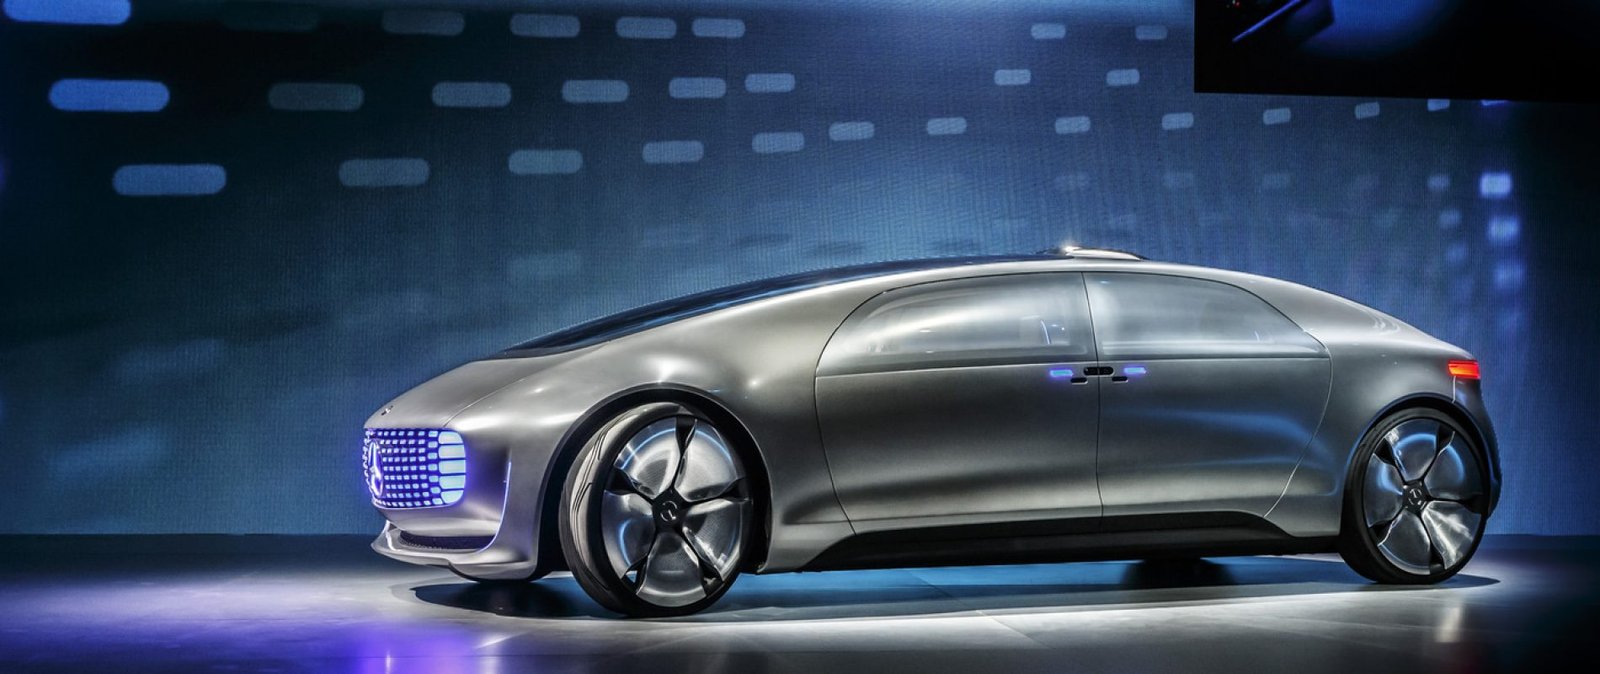 World premiere of the Mercedes-Benz F 015 Luxury in Motion at the CES, Las Vegas 2015
Weltpremiere des Mercedes-Benz F 015 Luxury in Motion auf der CES, Las Vegas 2015